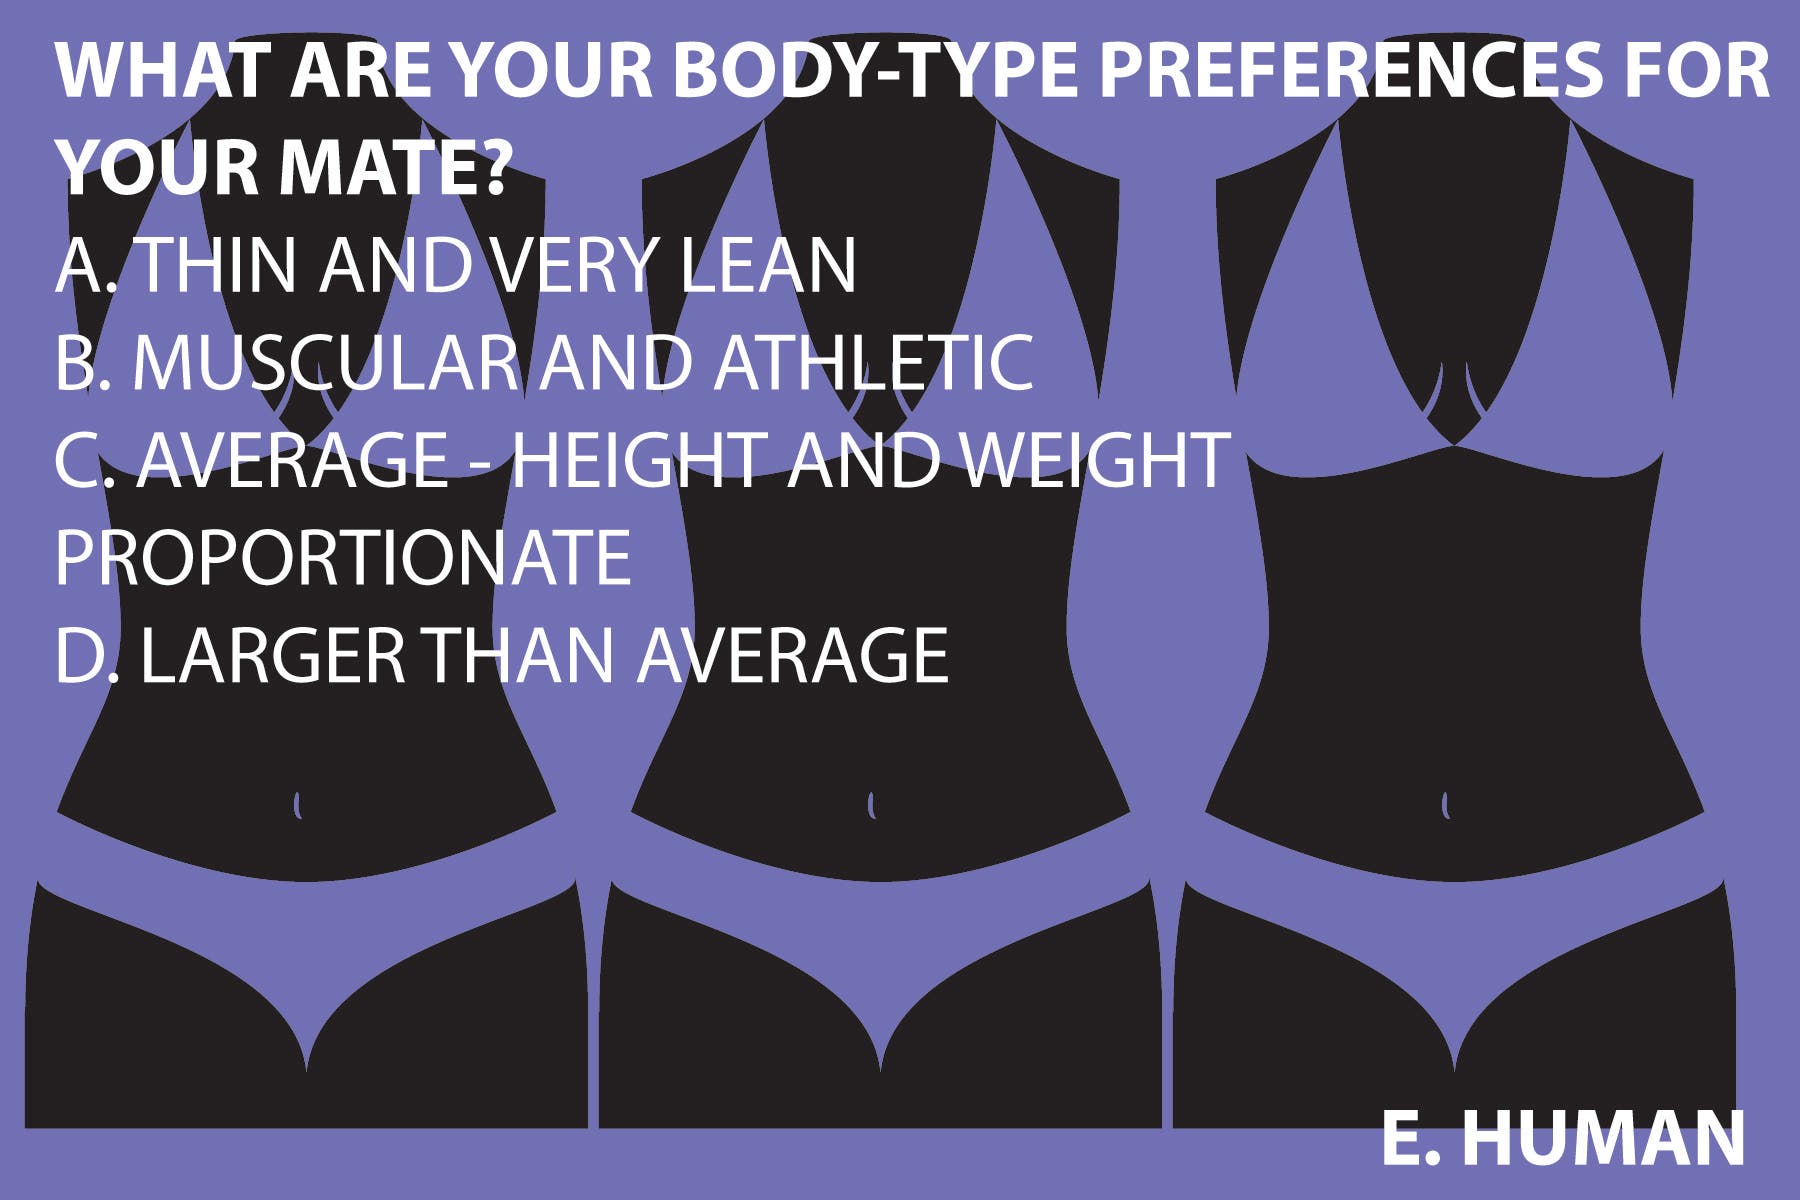  WHAT ARE YOUR BODY-TYPE PREFERENCES FOR YOUR MATE?